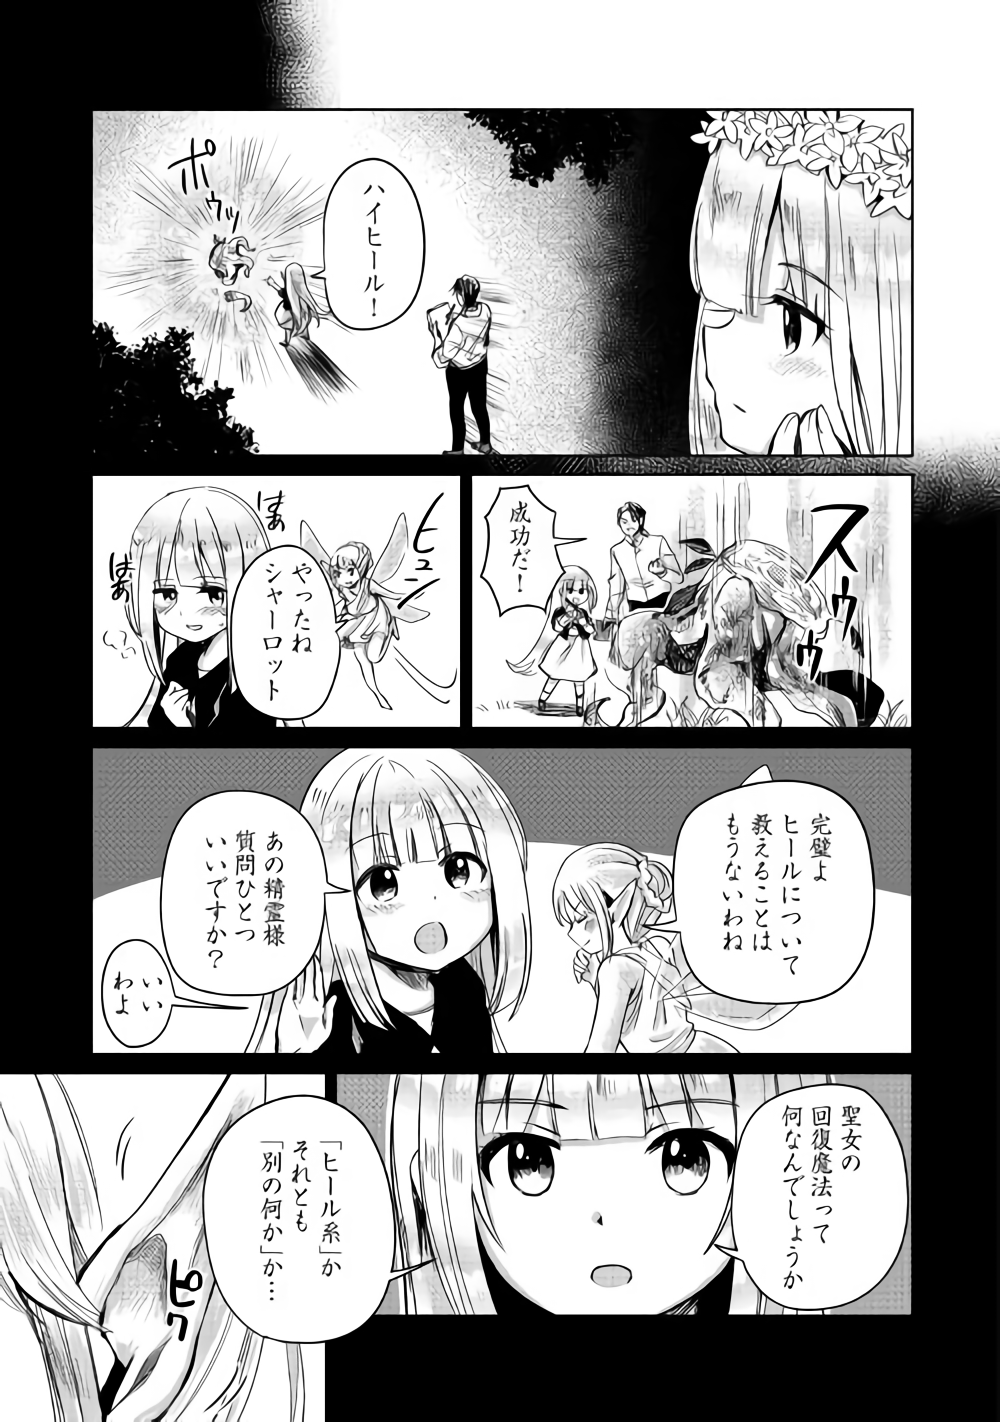 The Former Structural Researcher’s Story of Otherworldly Adventure 第4話 - Page 11